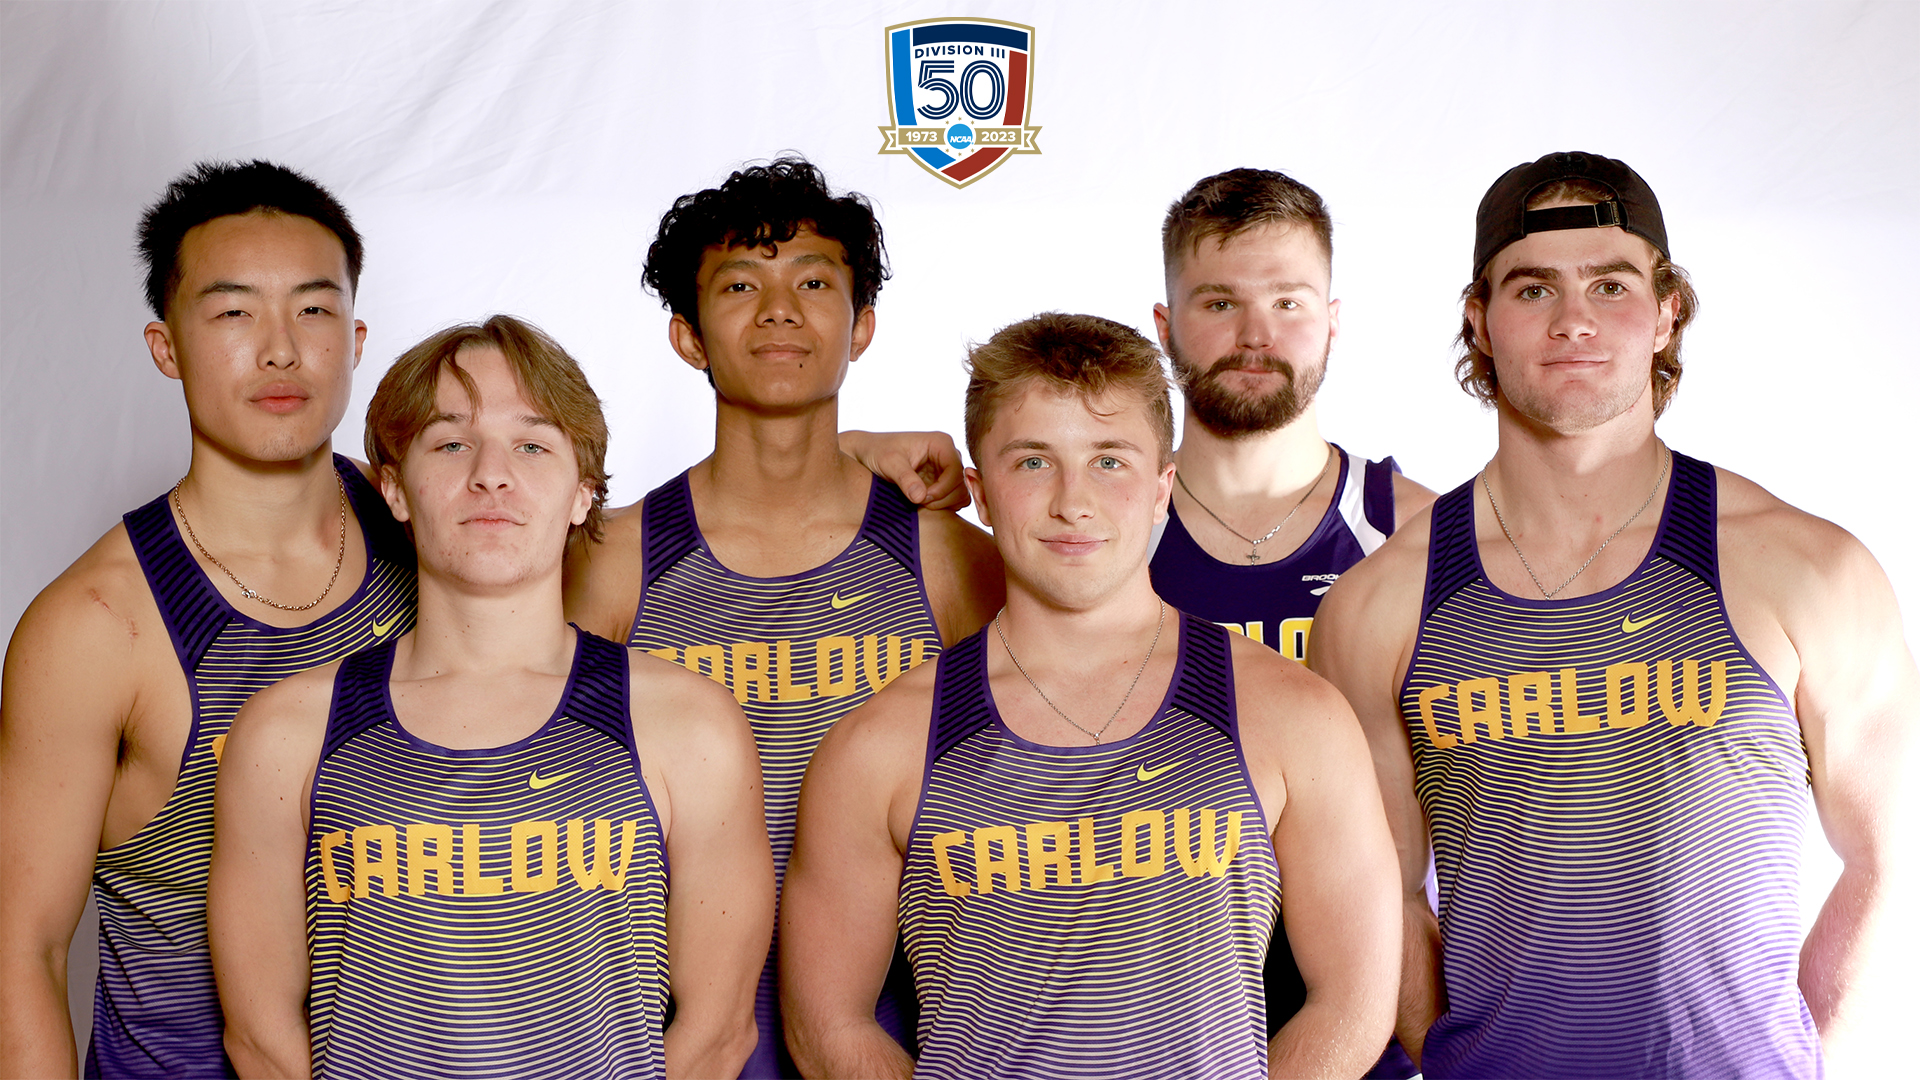 Members of the men’s track & field team. Photo by Robert Cifone.